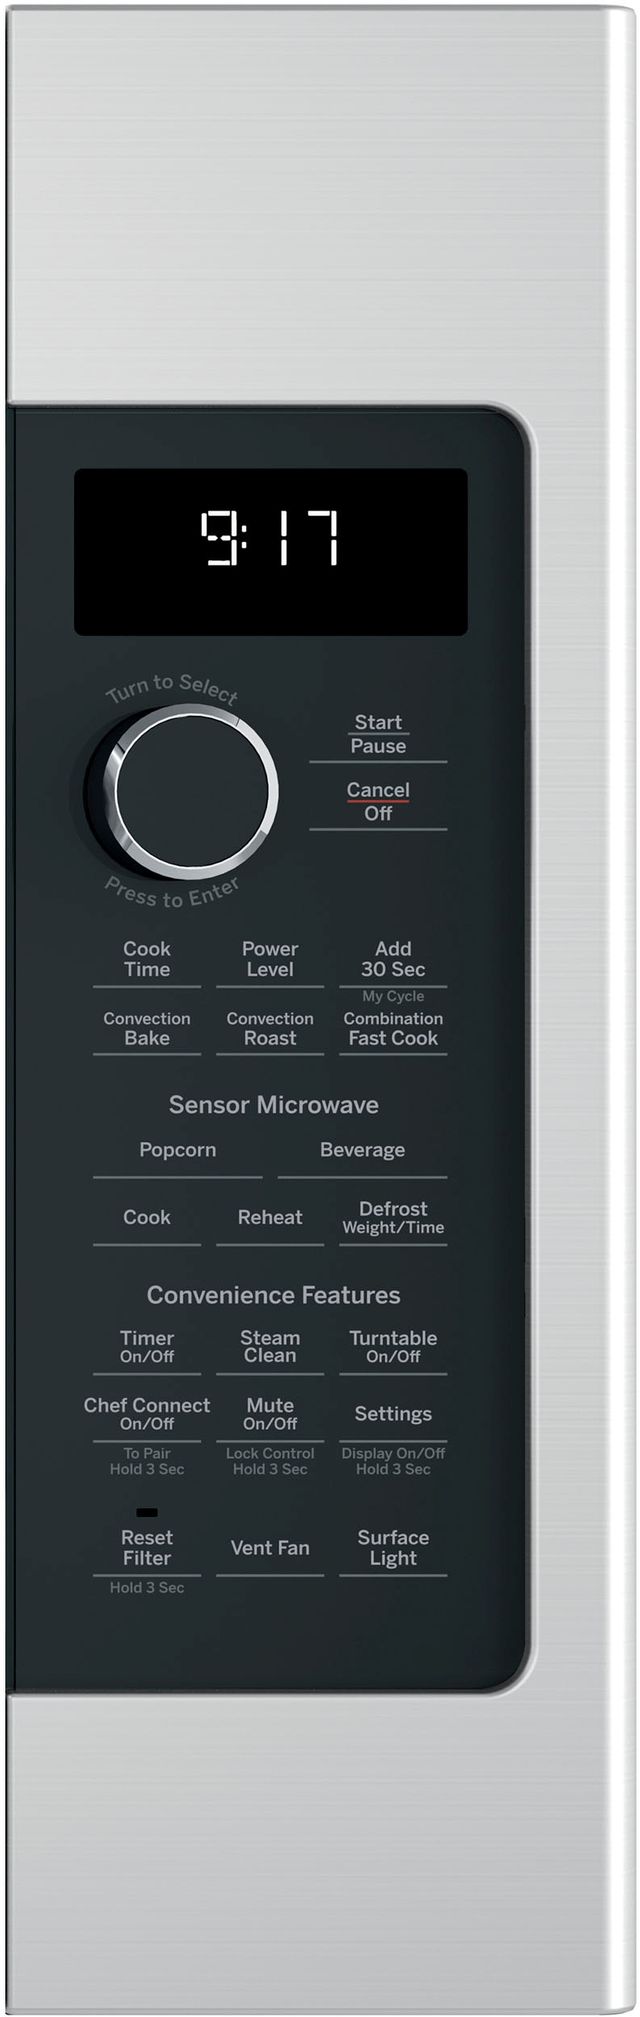 GE Profile™ 1.7 Cu. Ft. Stainless Steel Over The Range Microwave / Clearance / Obsolete Model / P221304 4